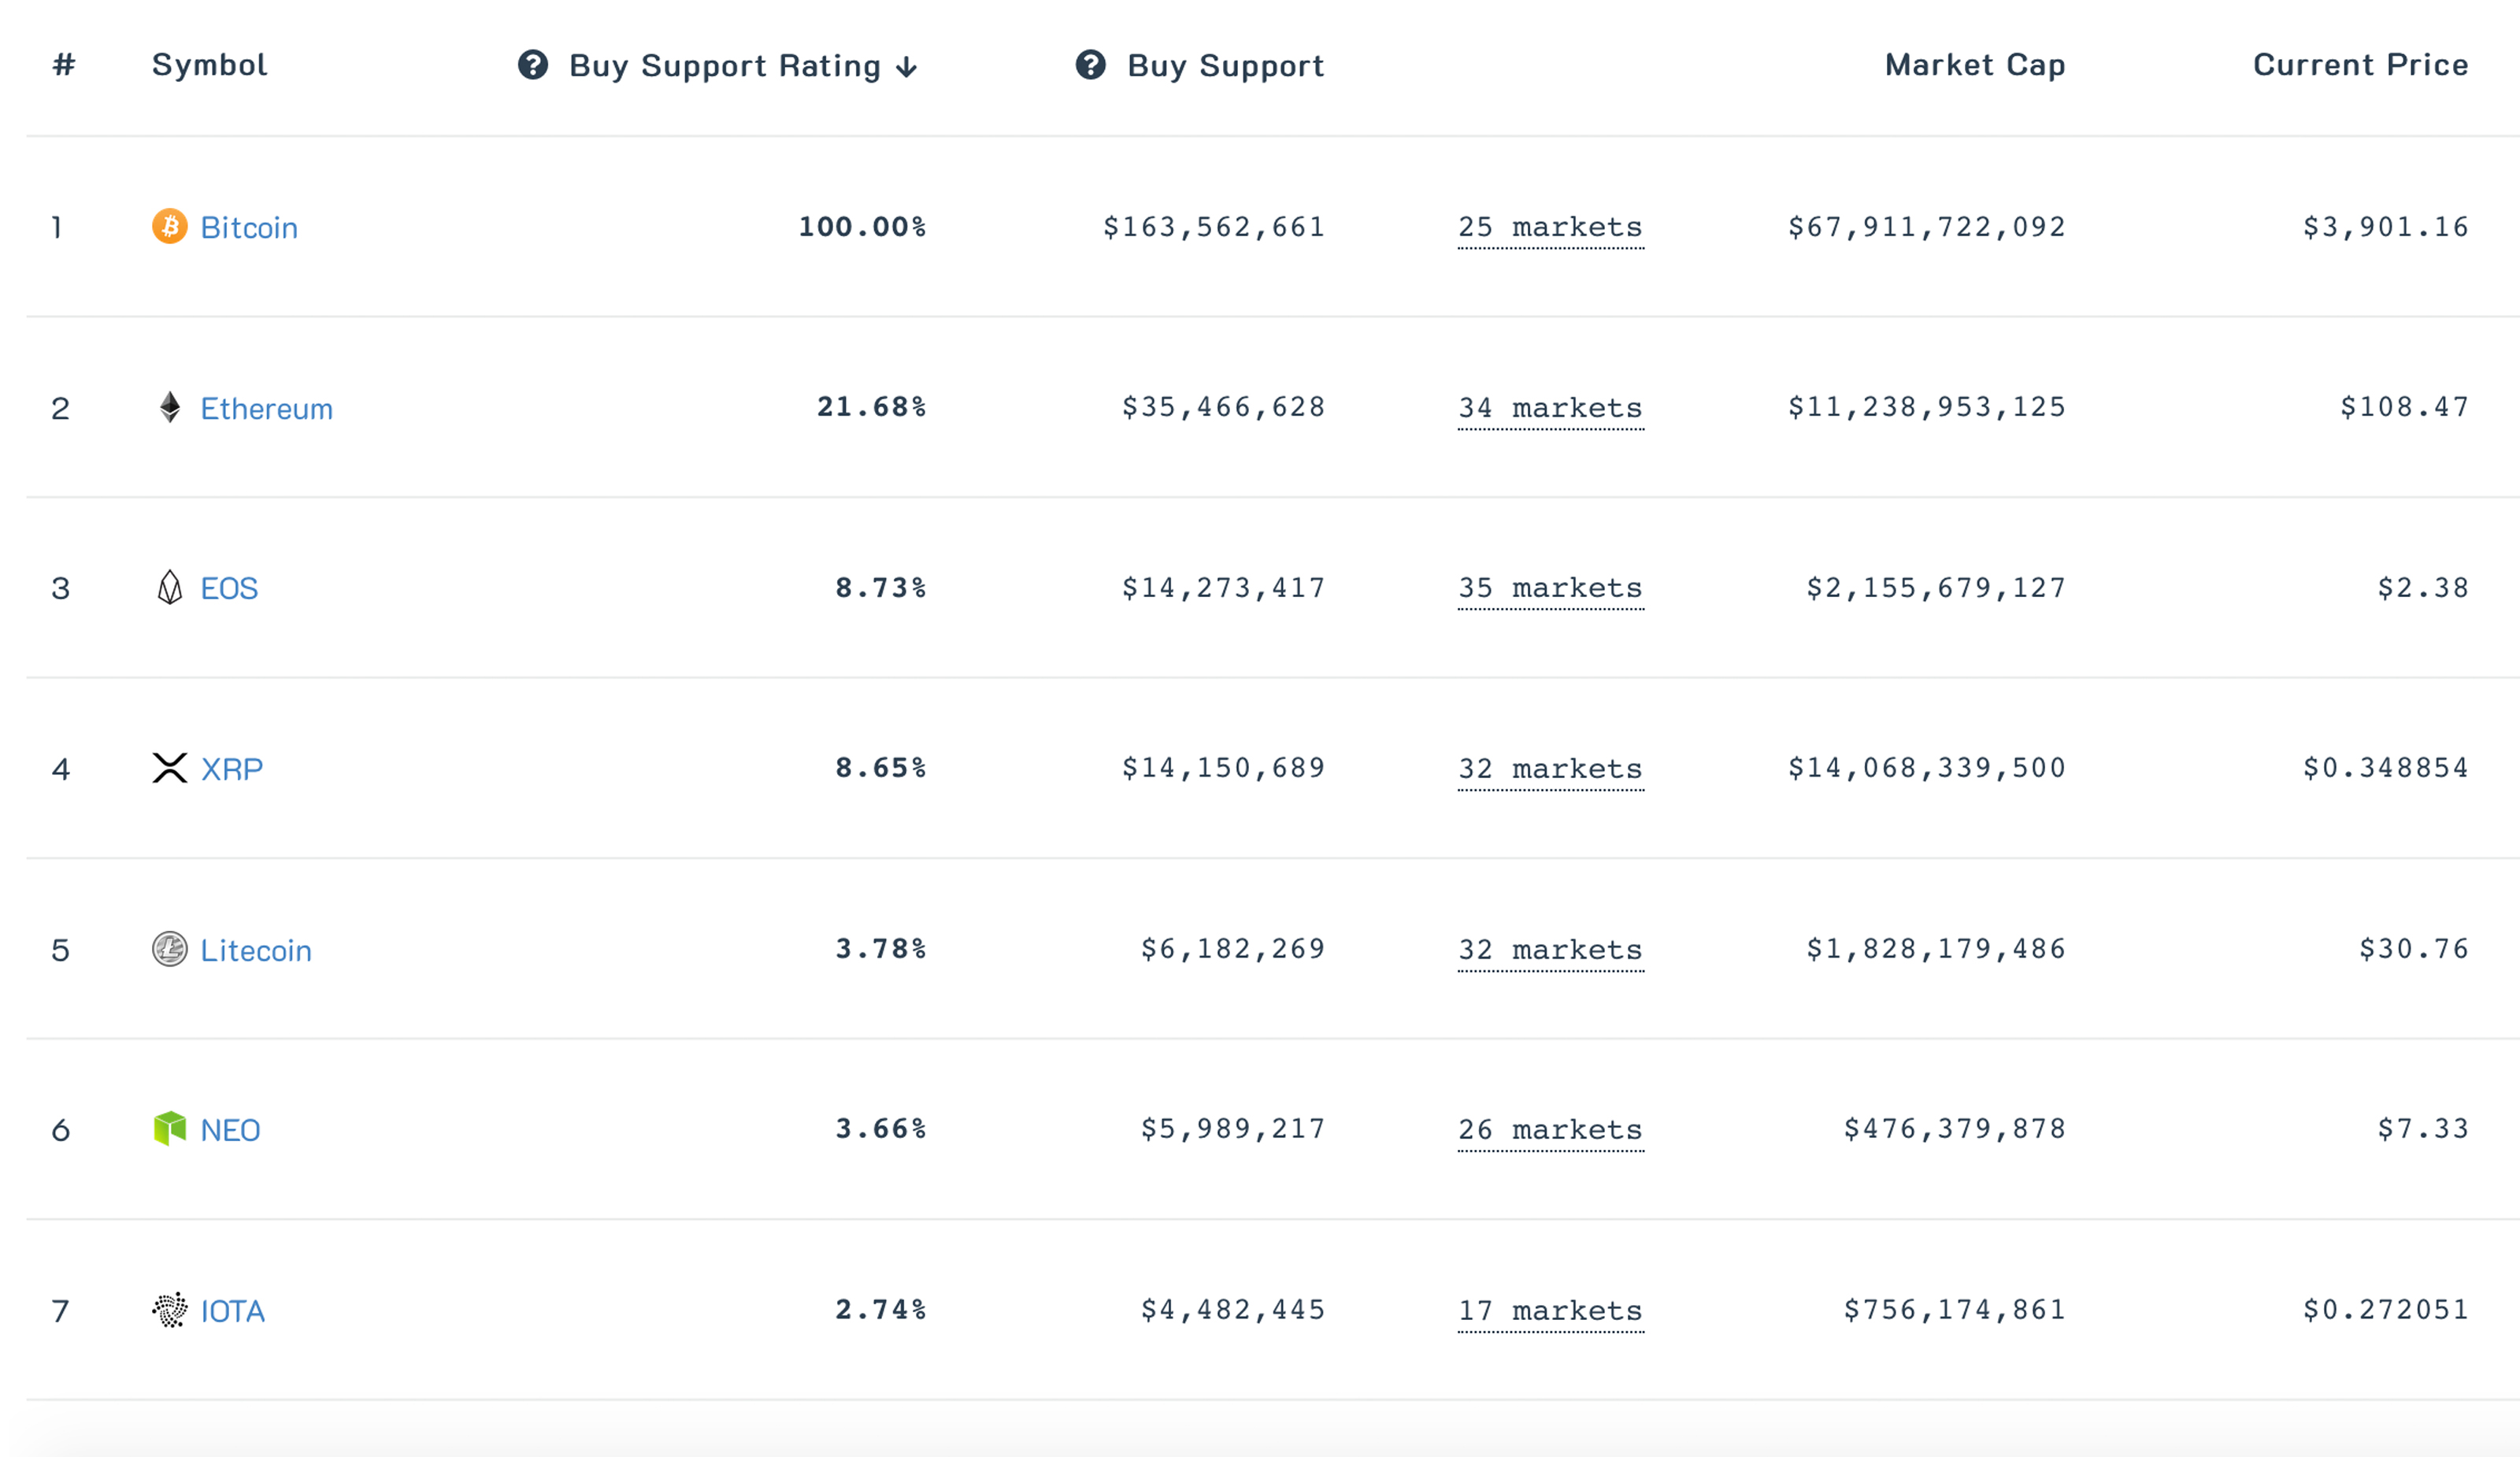 Coinmarketbook Gauges Cryptocurrencies by Buy Support Rather Than Market Cap